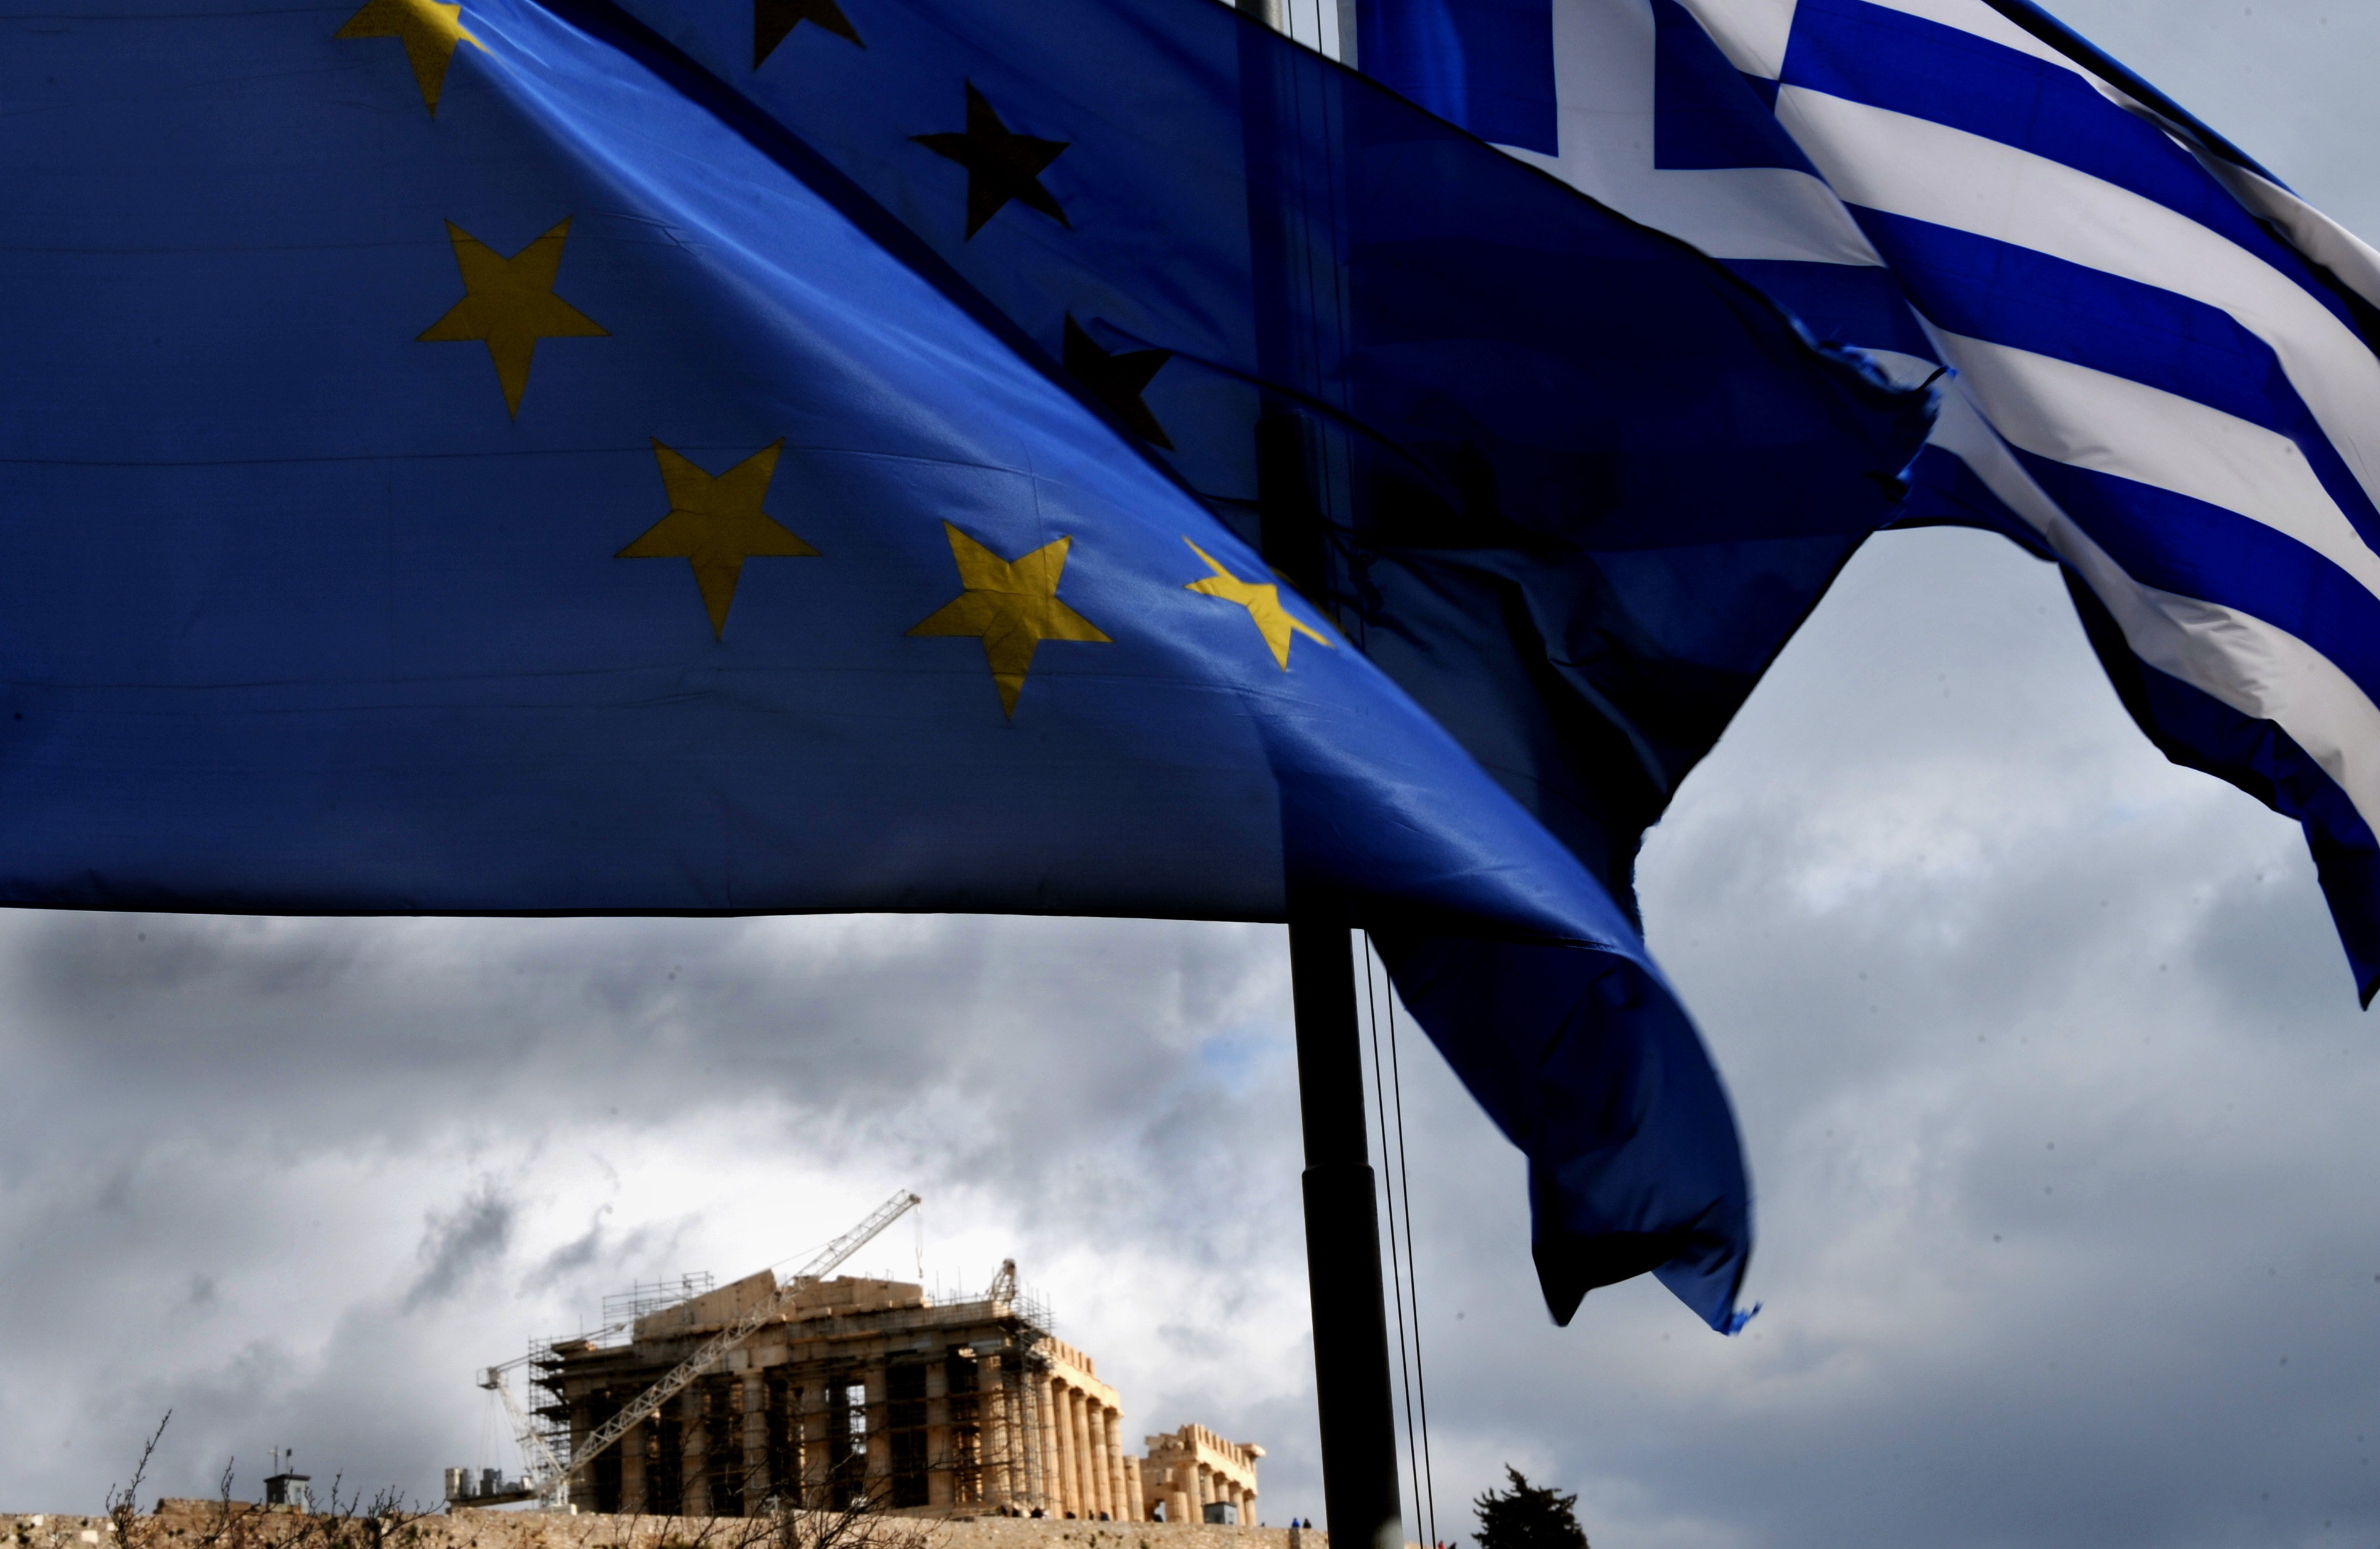 Greece to submit request for extension of loan agreement on Thursday